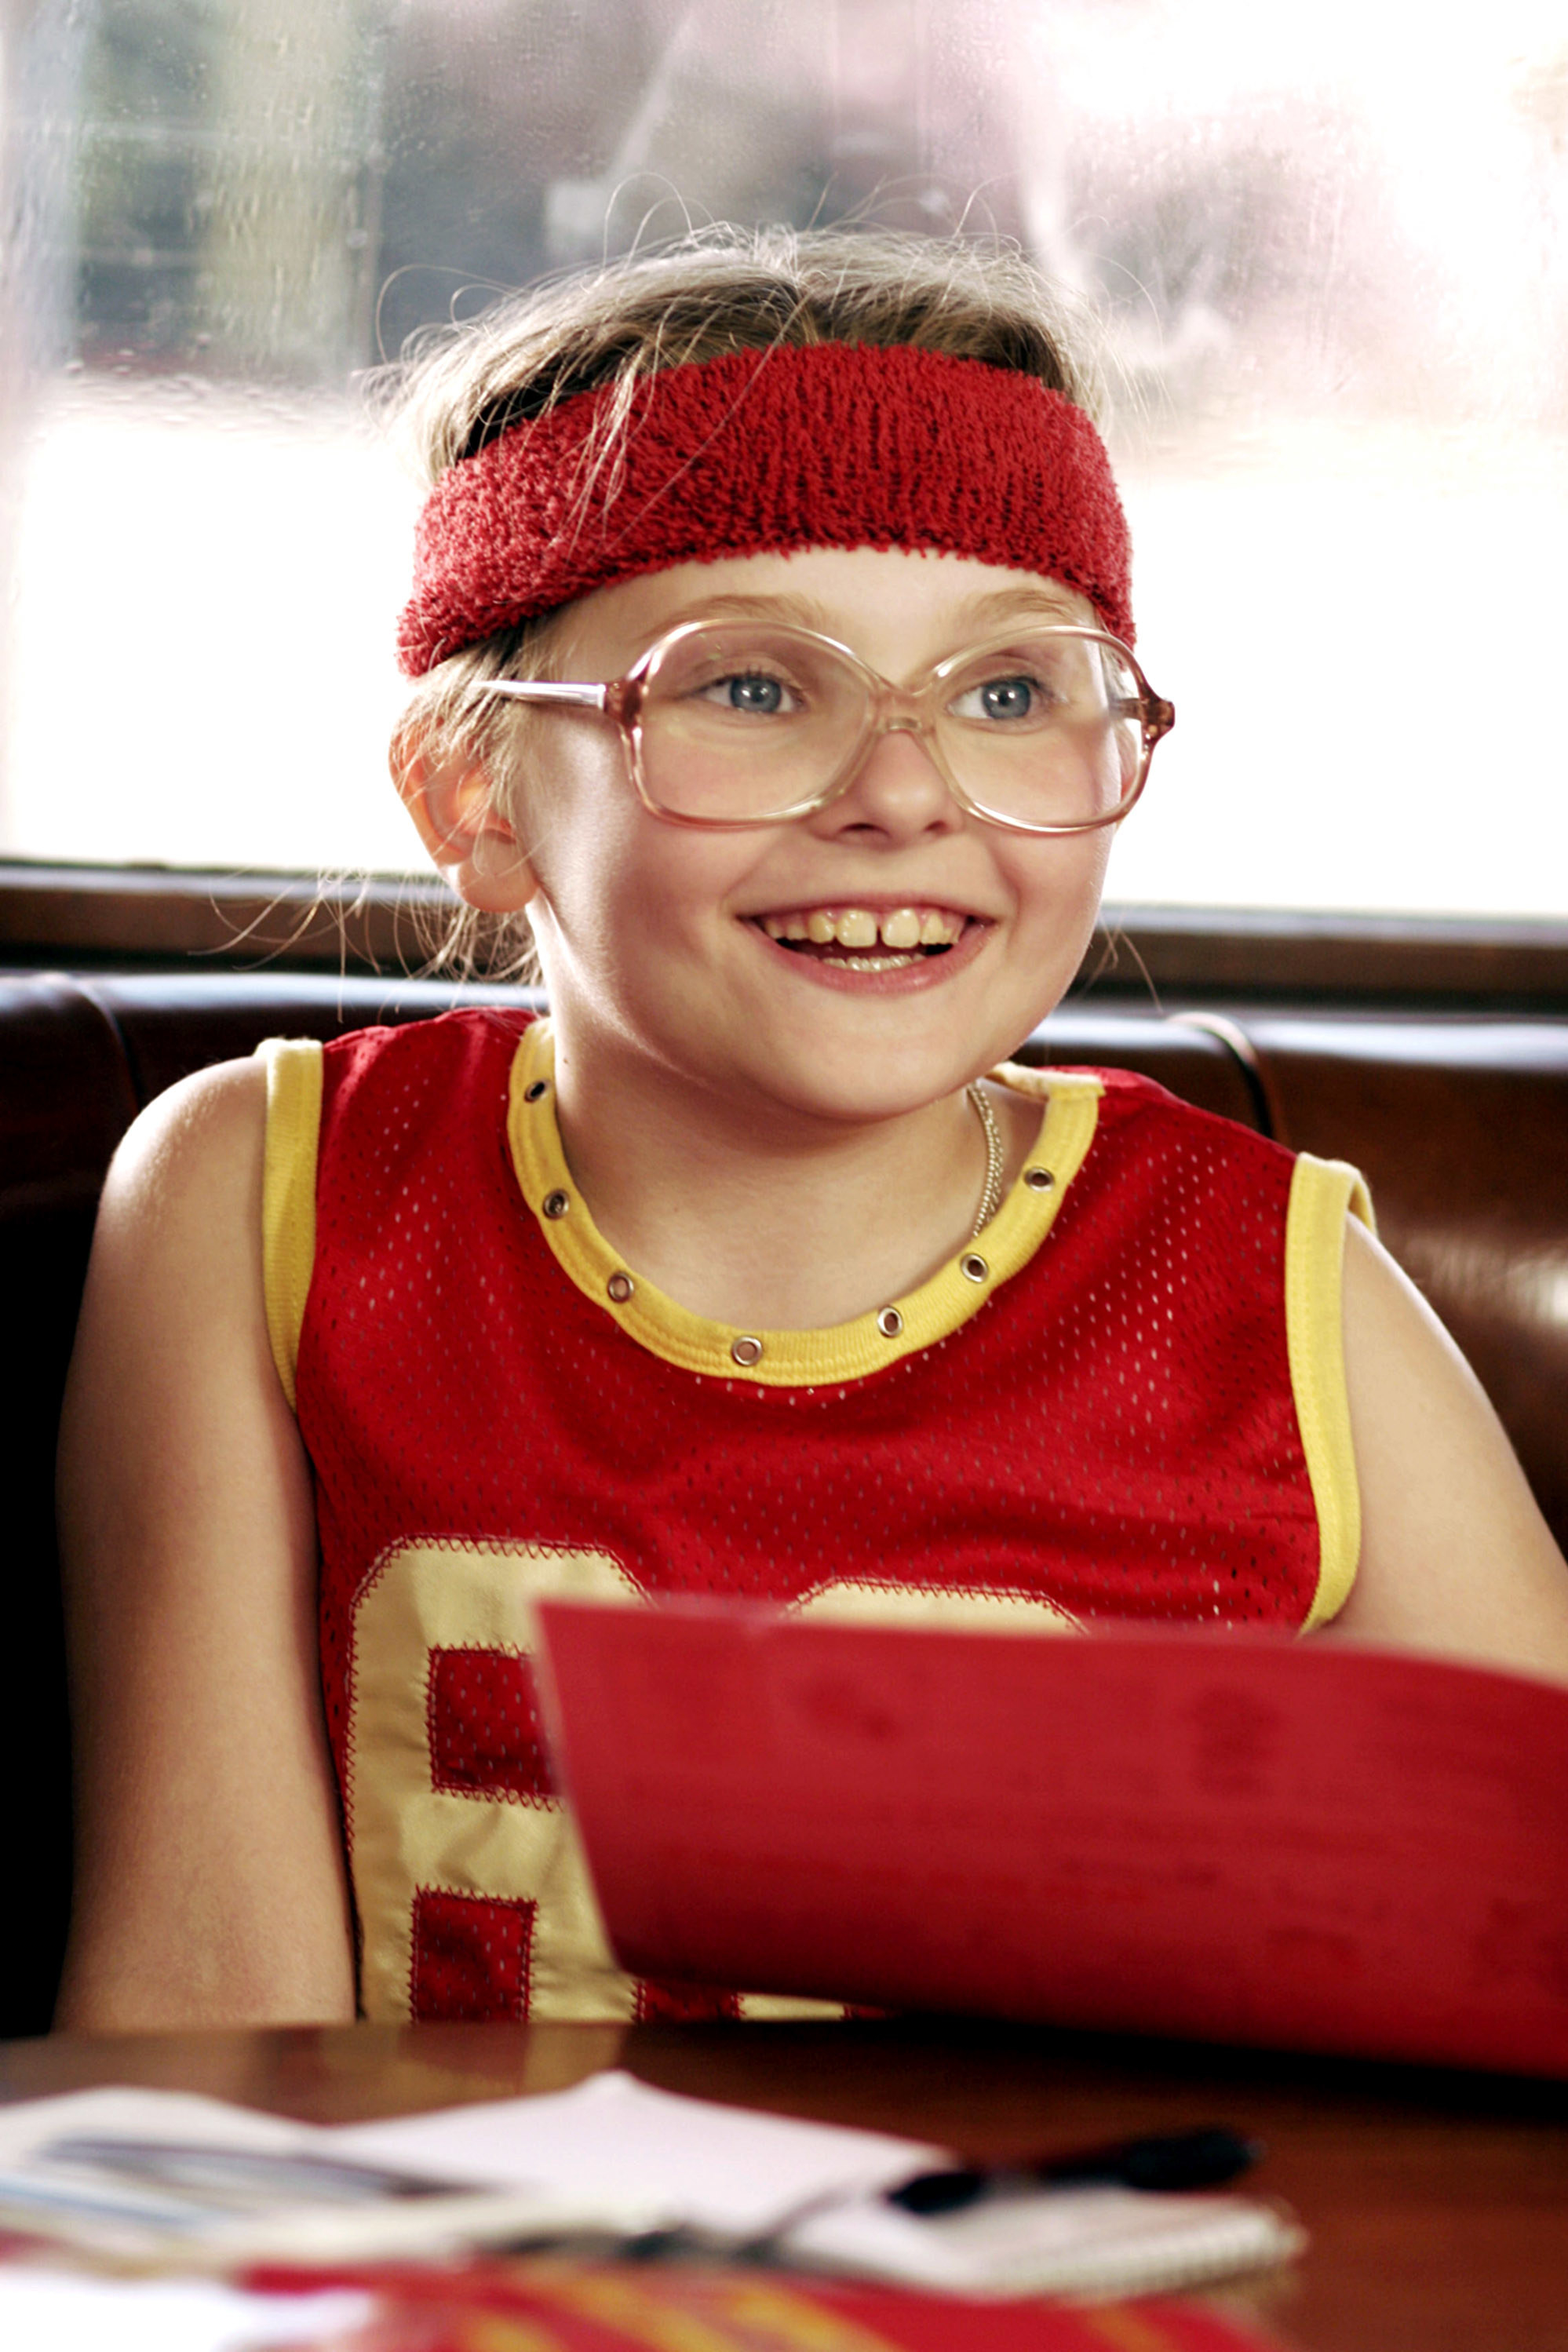 Abigail wearing glasses, a jersey, and a sweatband on a her head